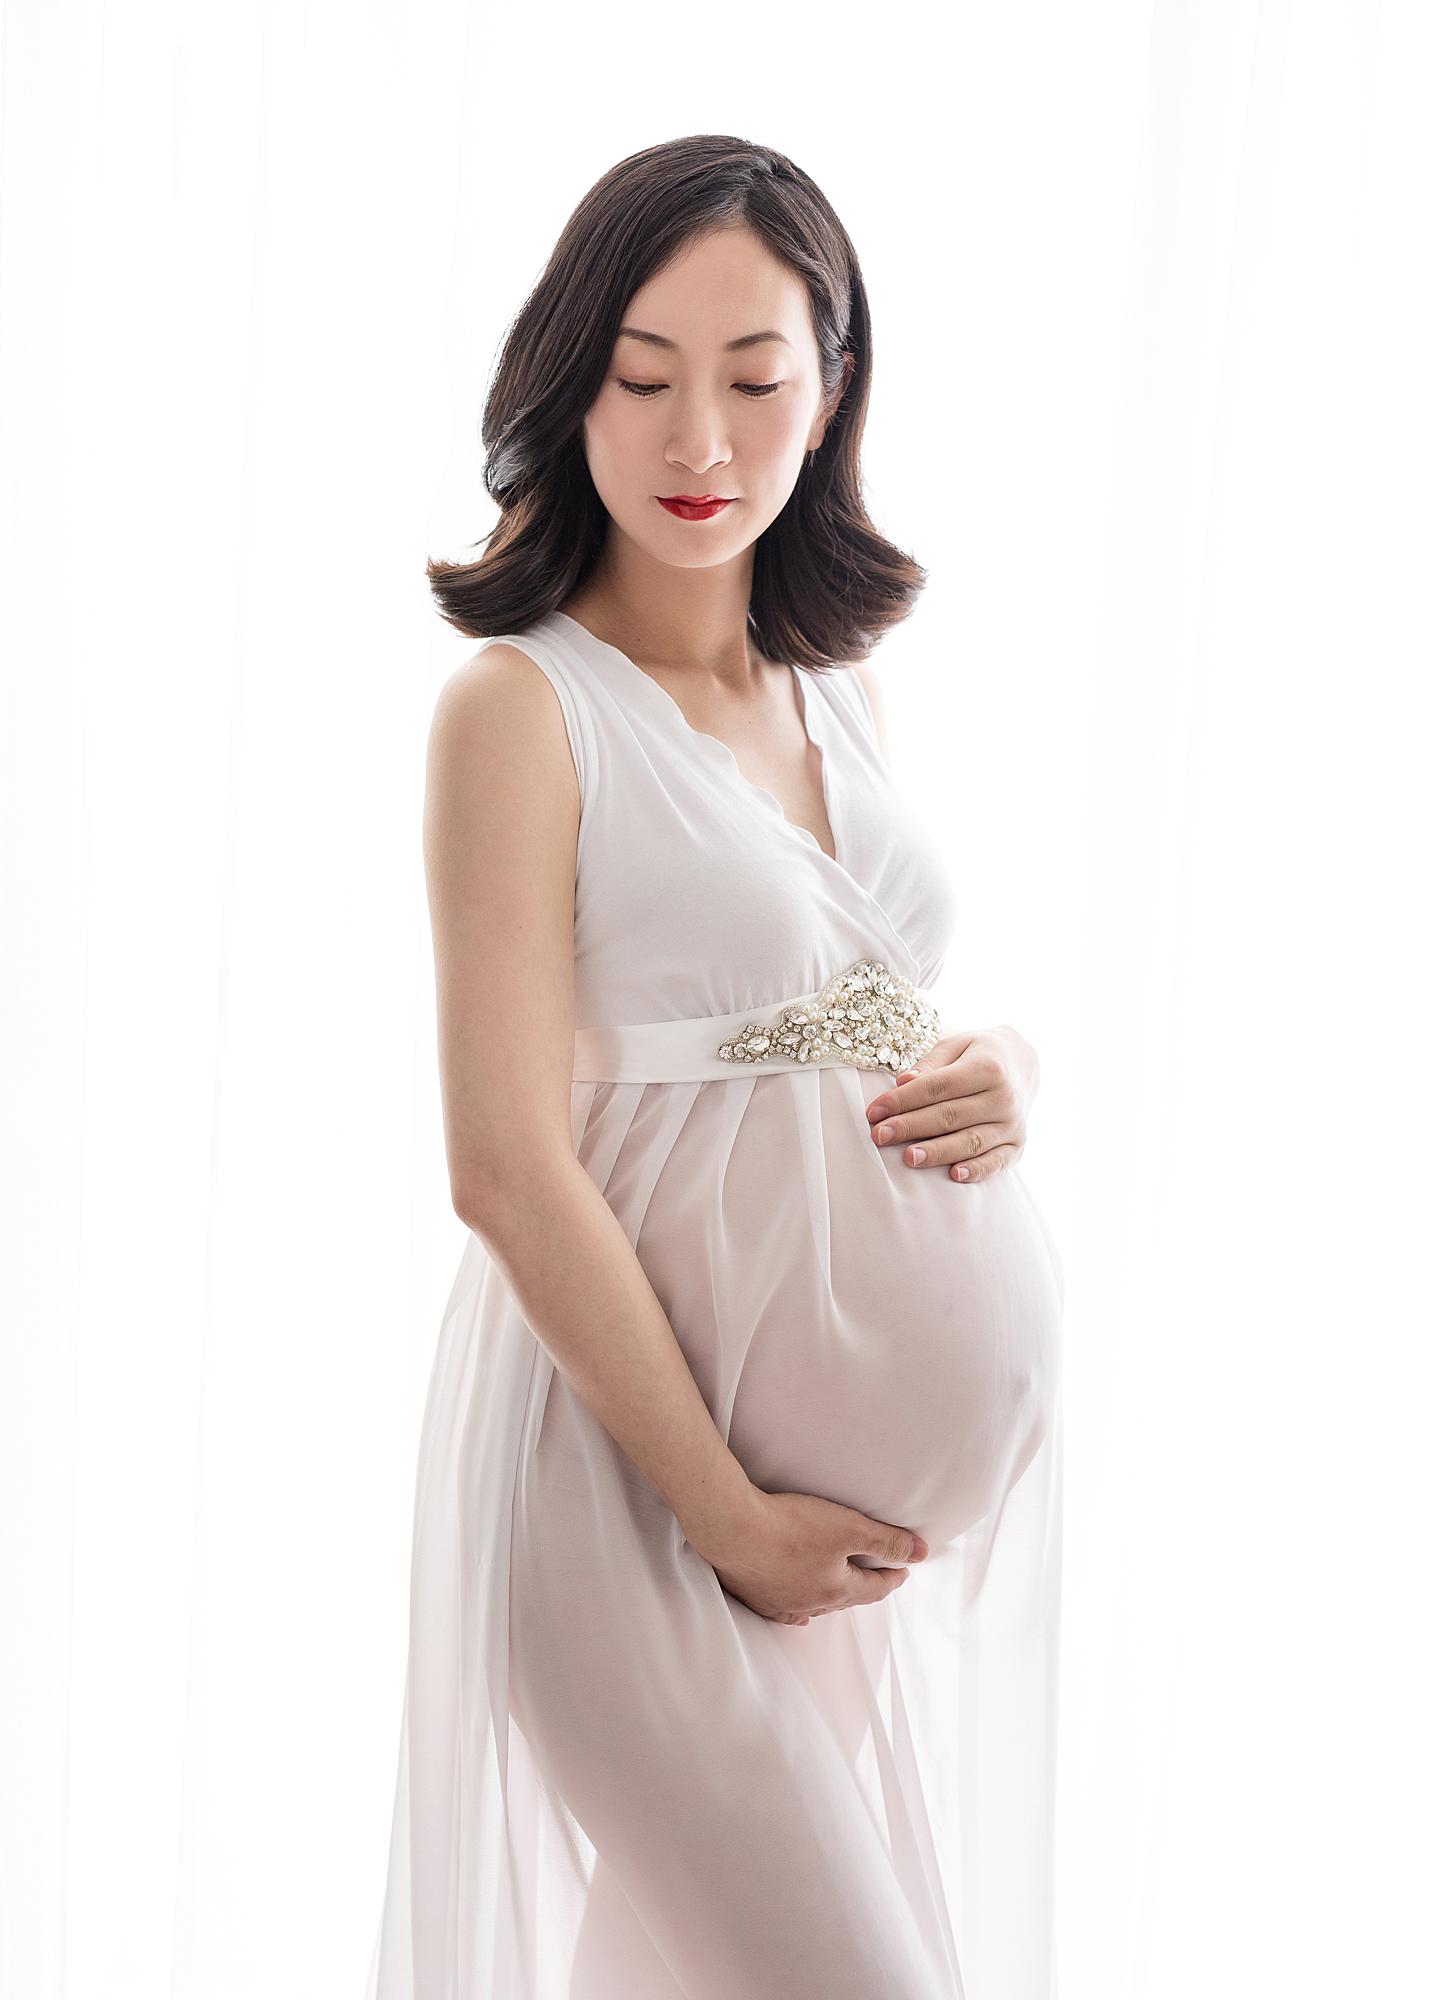 Pregnant woman posing in sheer white dress for a maternity photoshoot in Suffolk